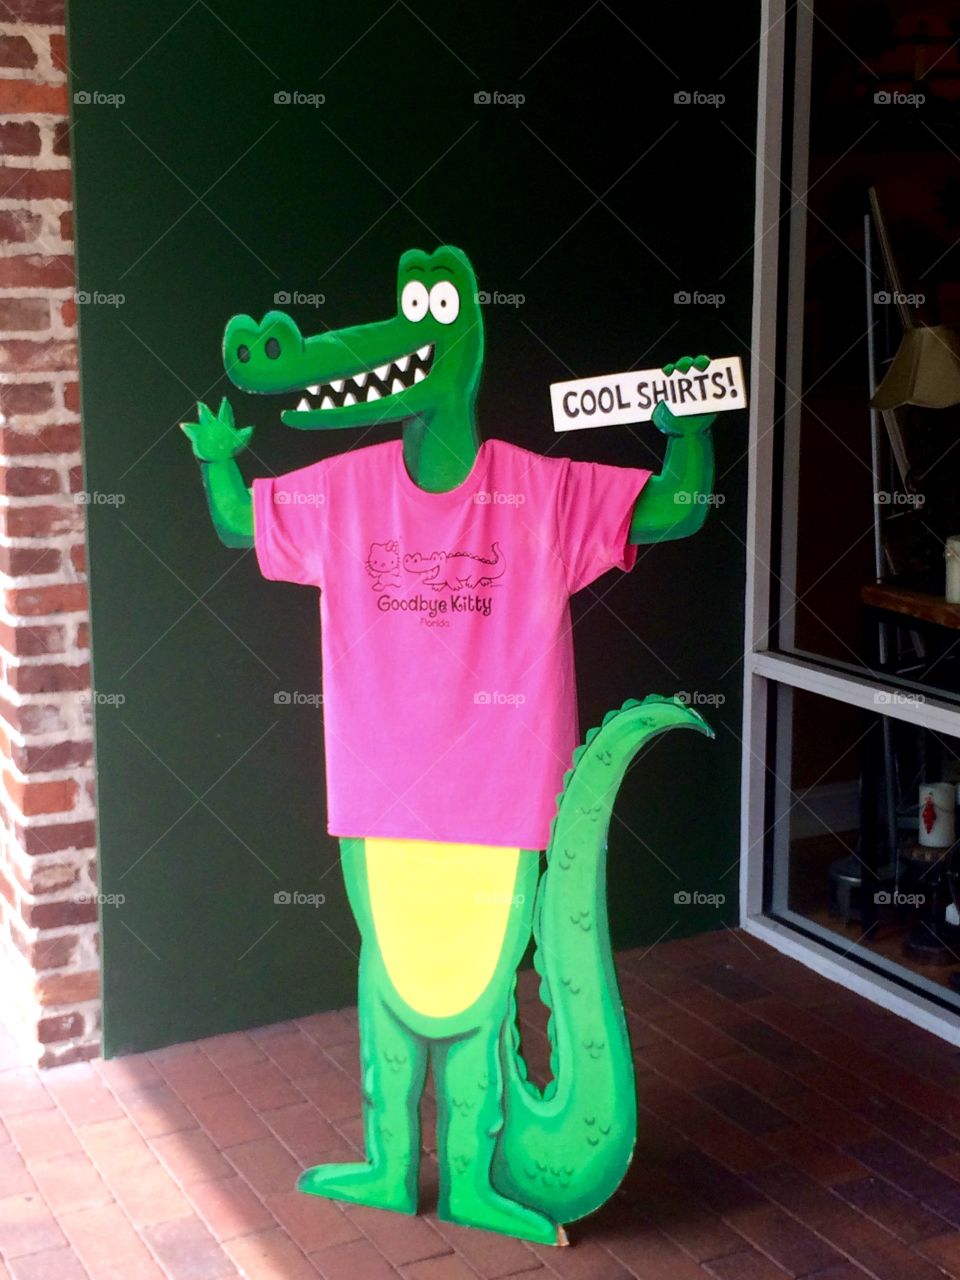 The Croc. Tee shirt sign, downtown Fort Myers, Florida